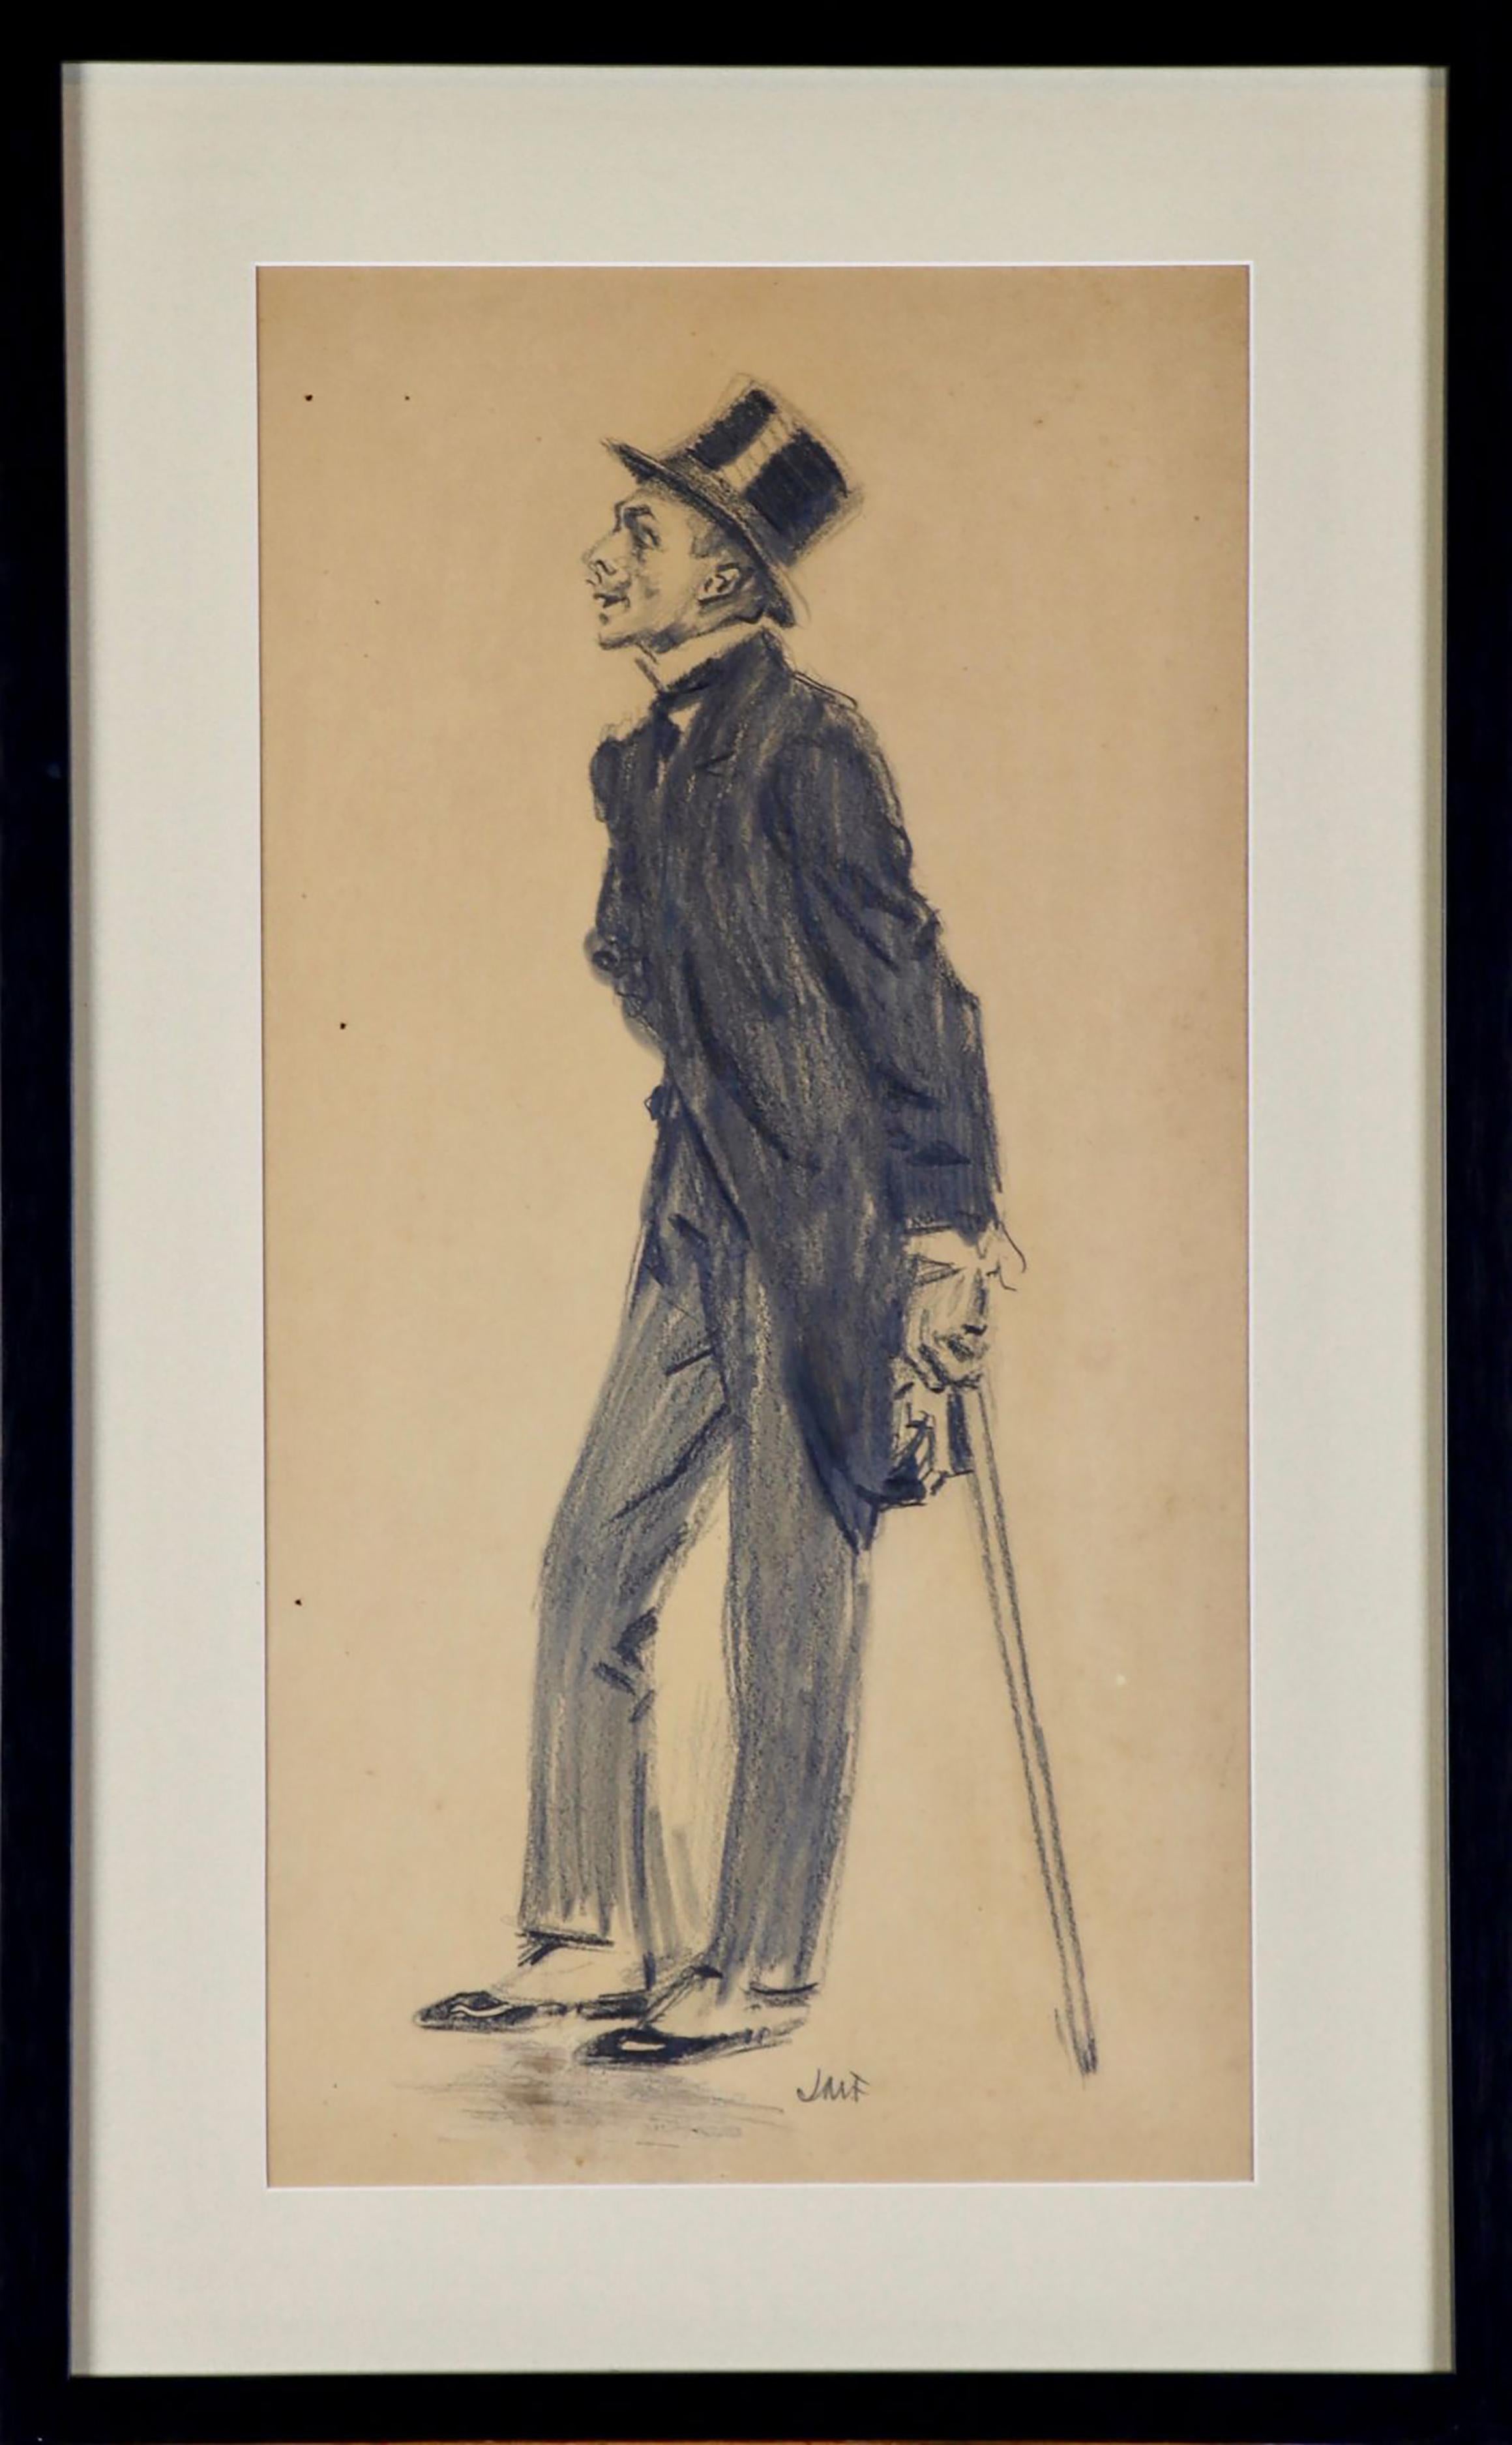 man with top hat and cane